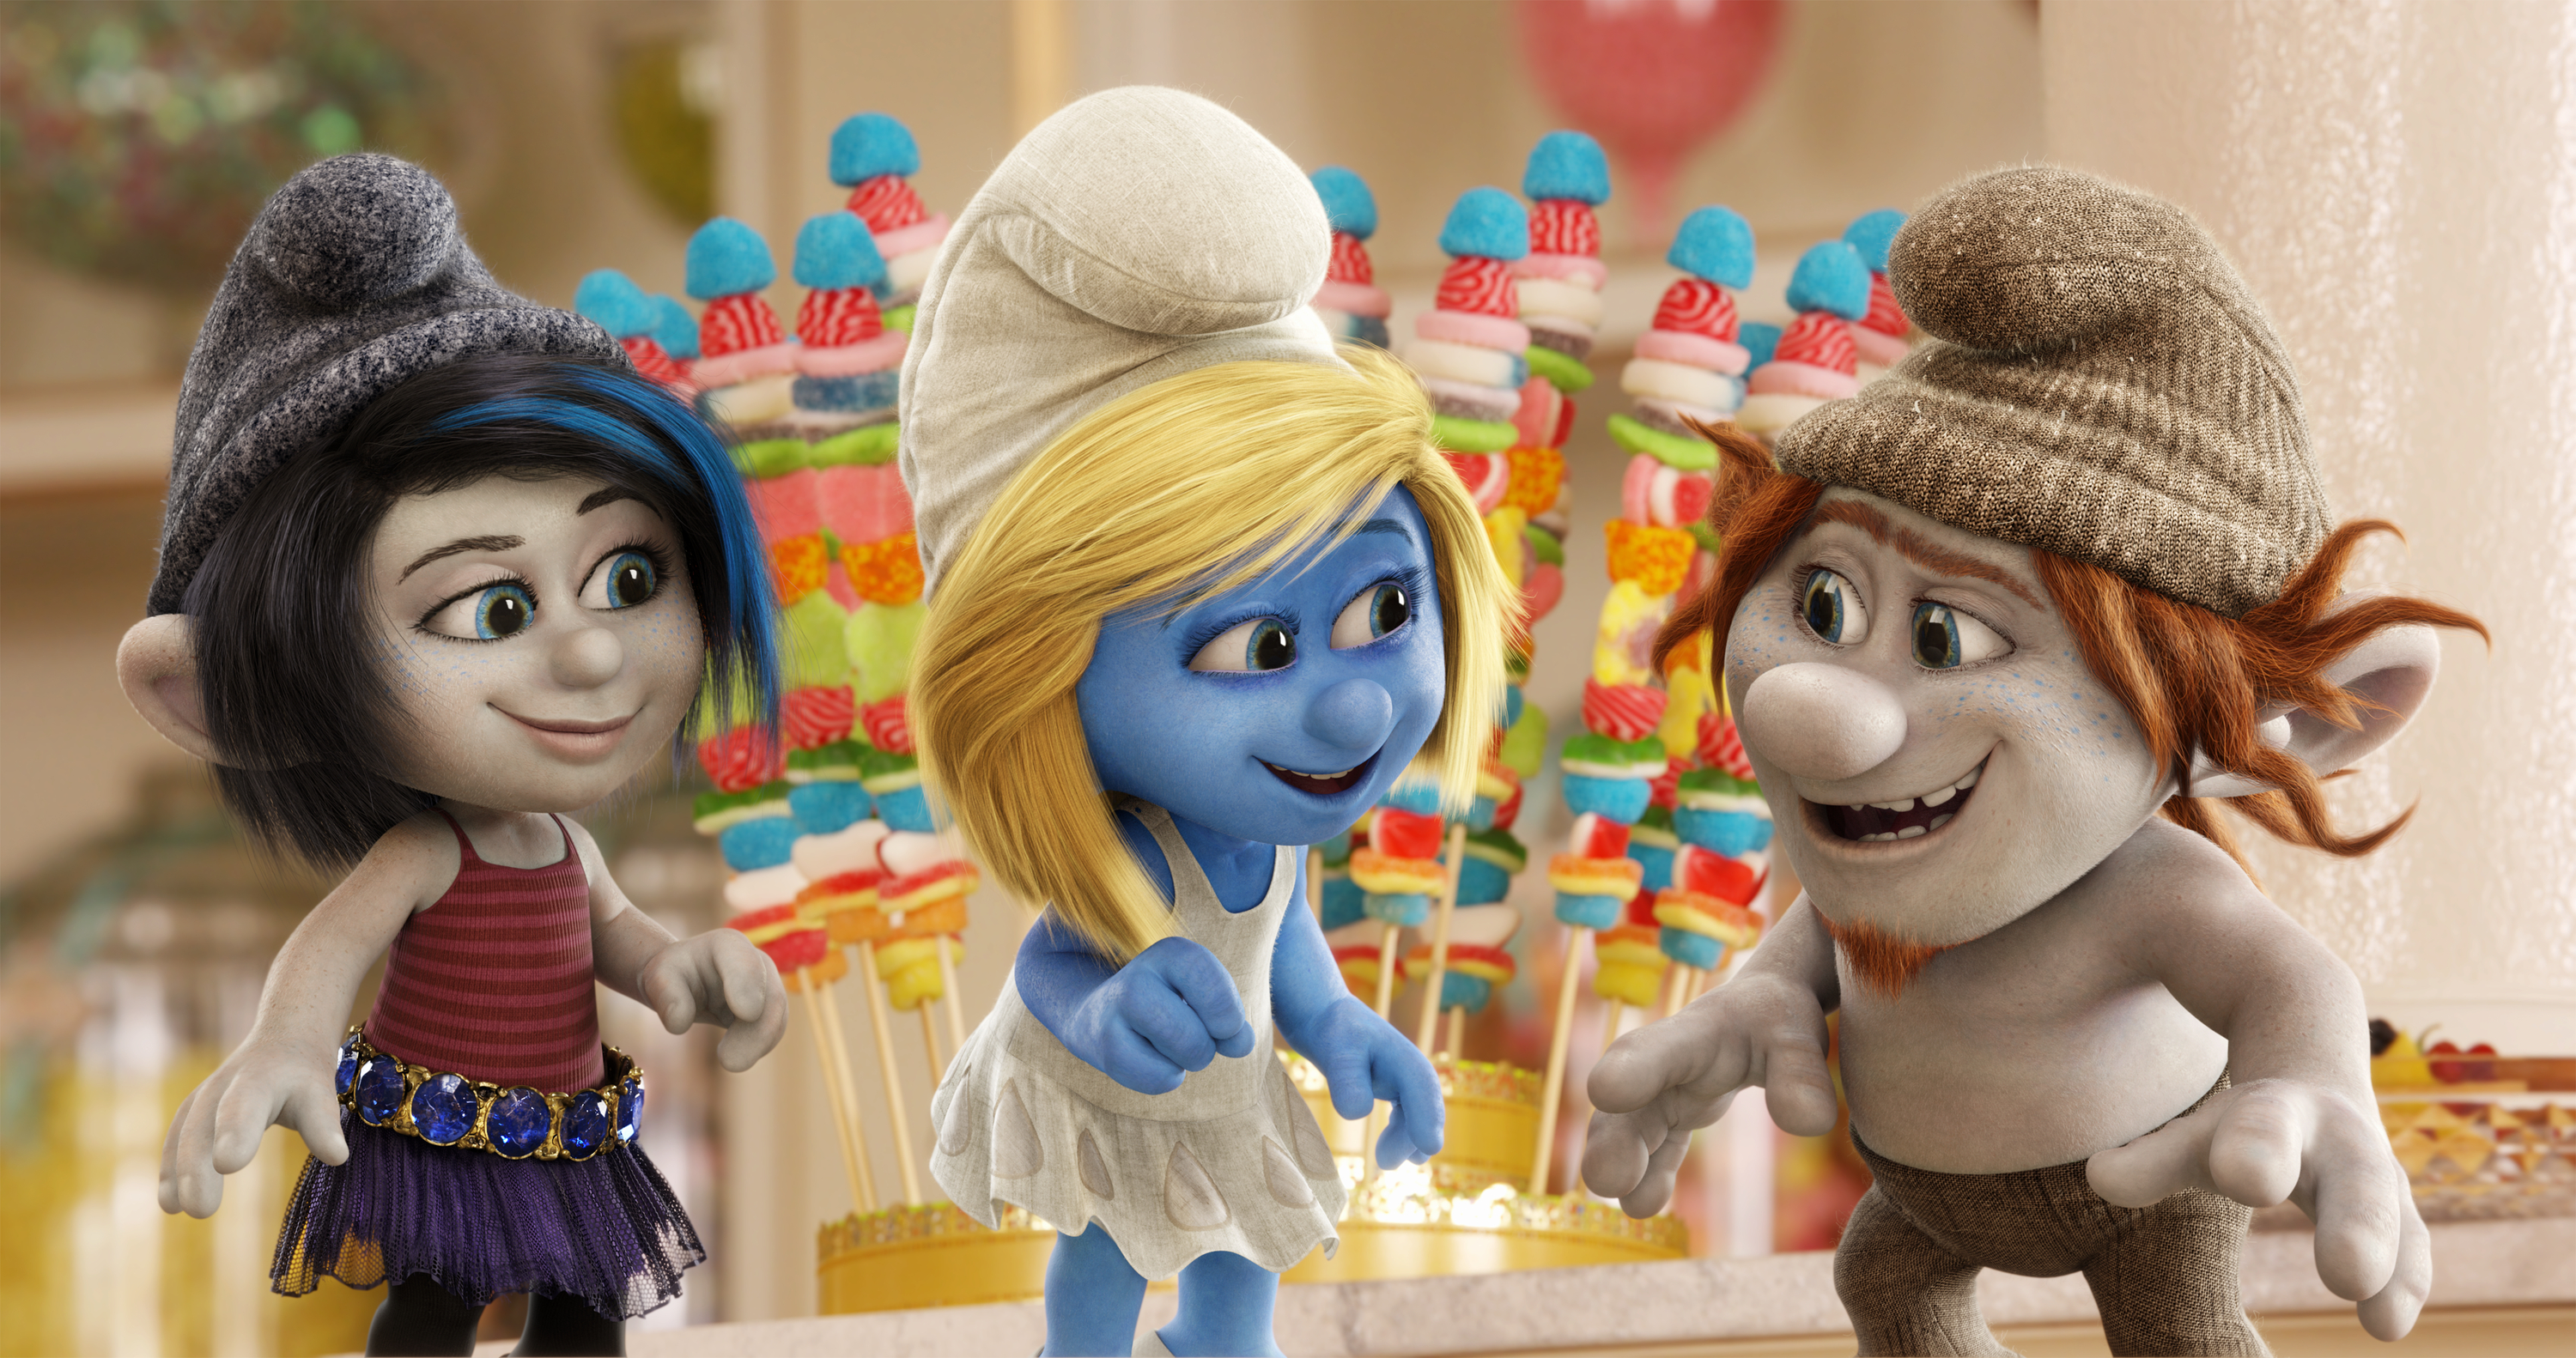 Others like the change-up in casting since Demi Lovato was Smurfette in the third Smurfs movie